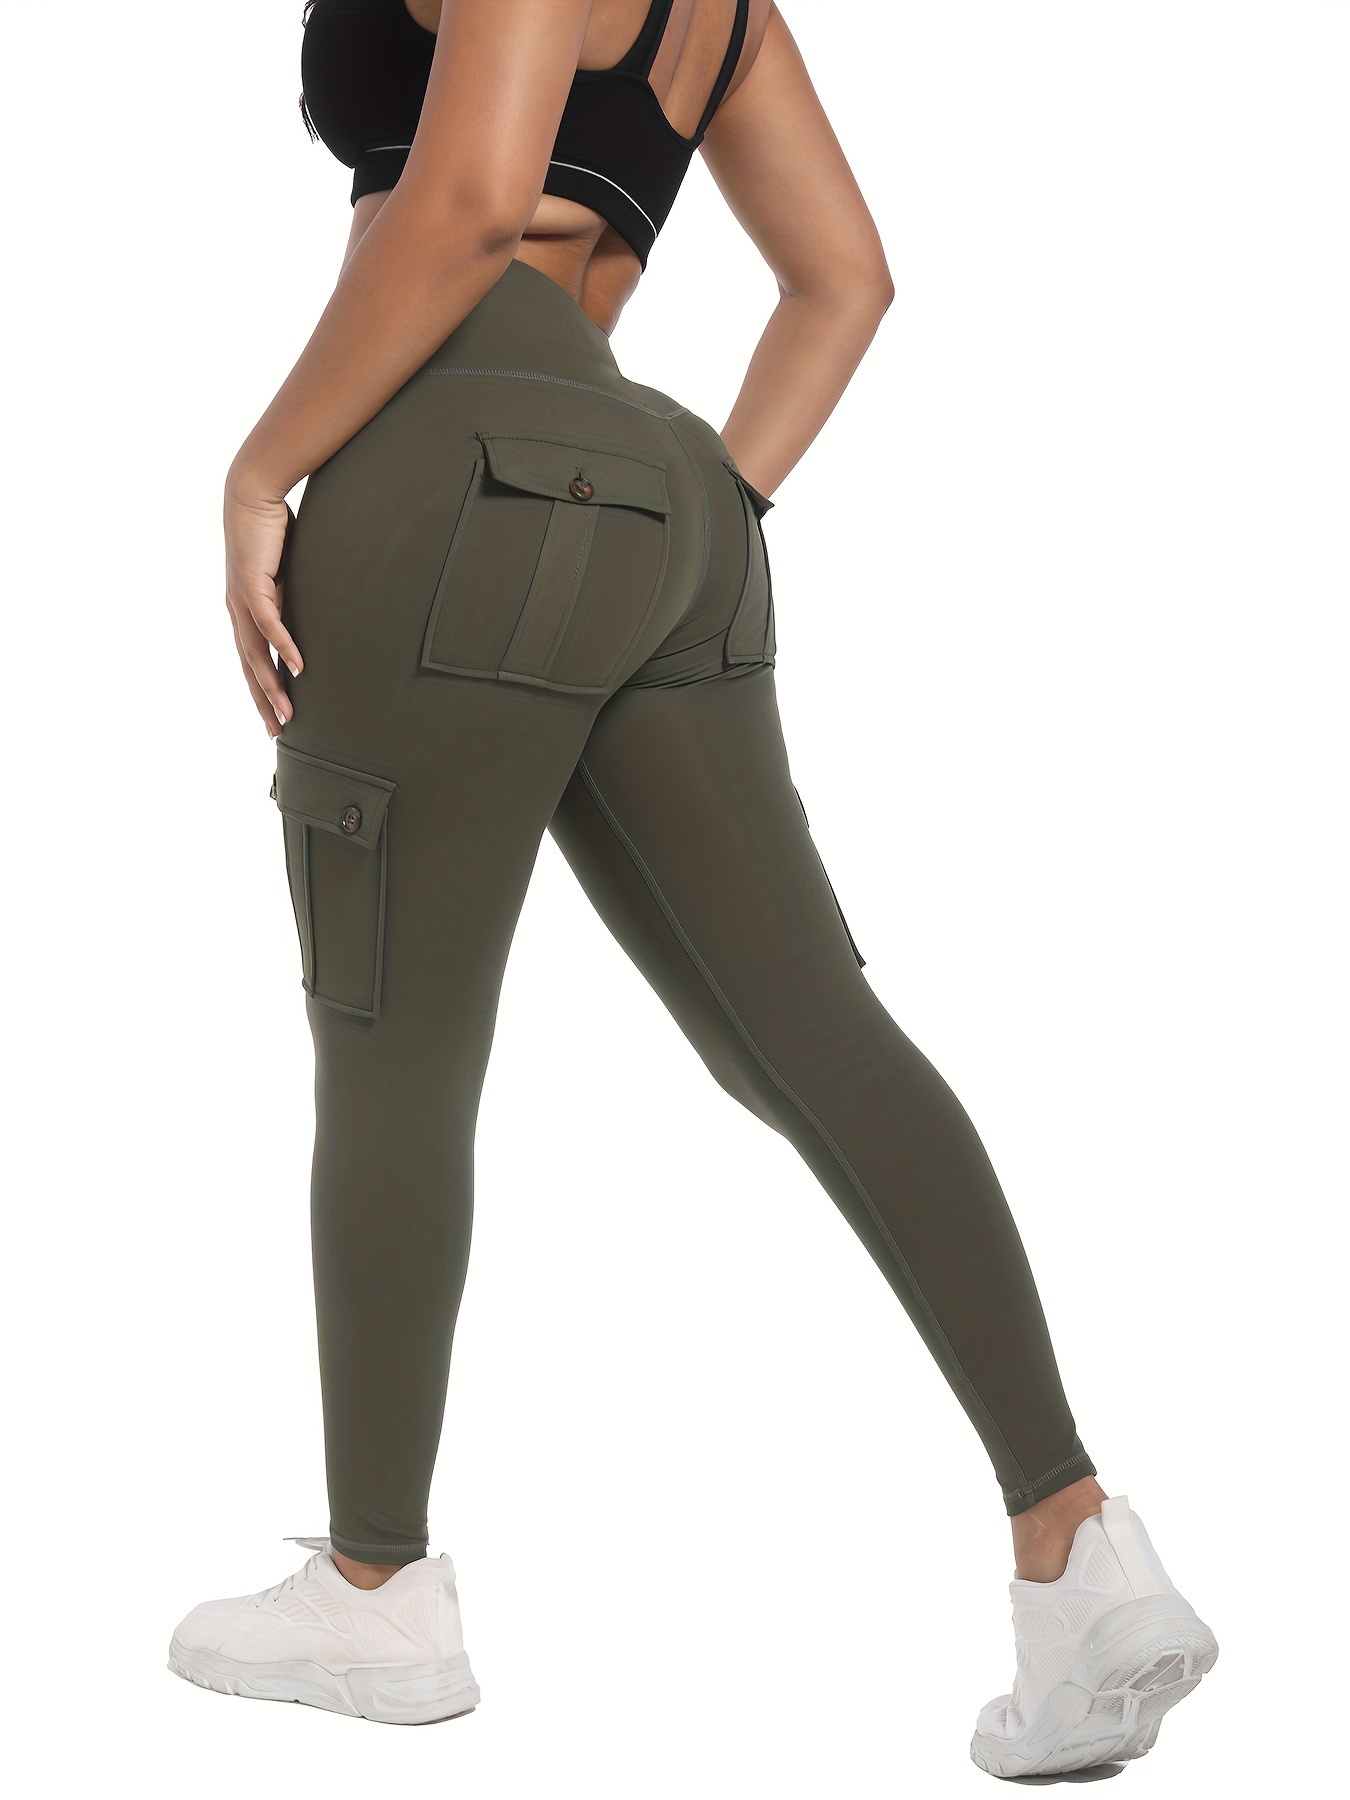 Women High Waisted Cargo Leggings with Multi Pockets Stretchy Quick-dry  Yoga Pants Butt-Lift Workout Jogging Pants (Small, Khaki) 